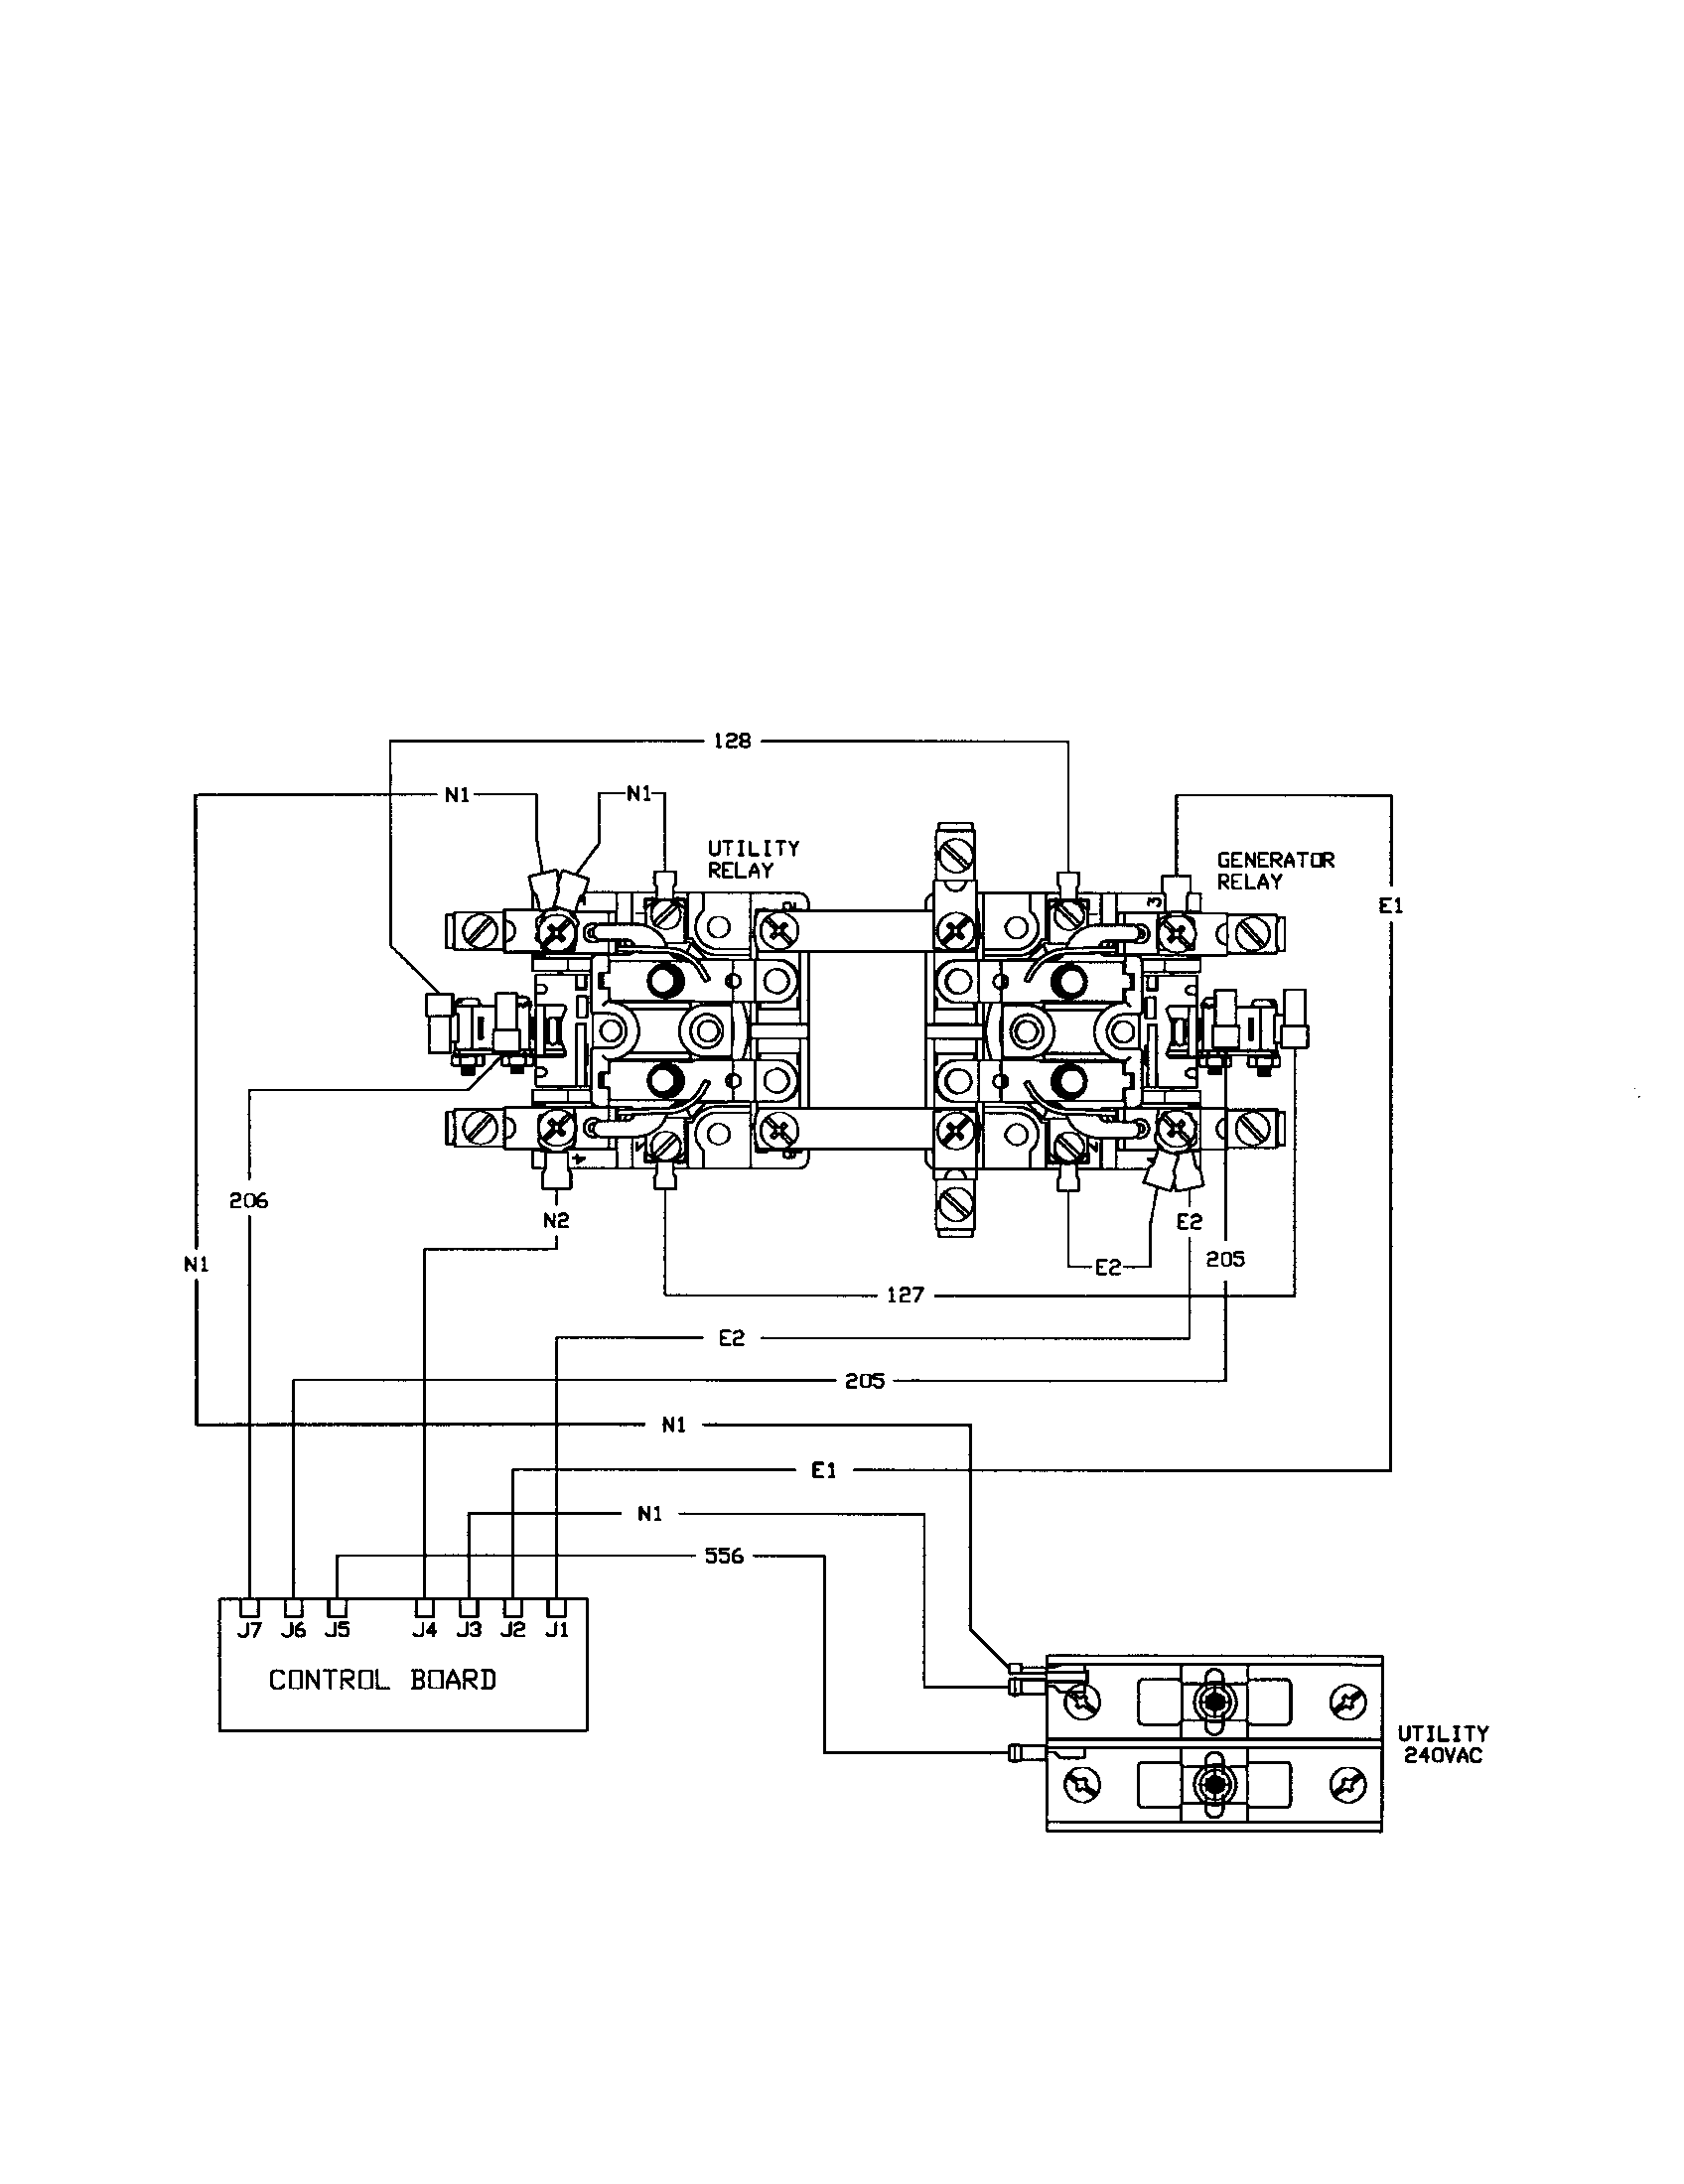 Briggs And Stratton Transfer Switch Wiring Diagram from c.searspartsdirect.com